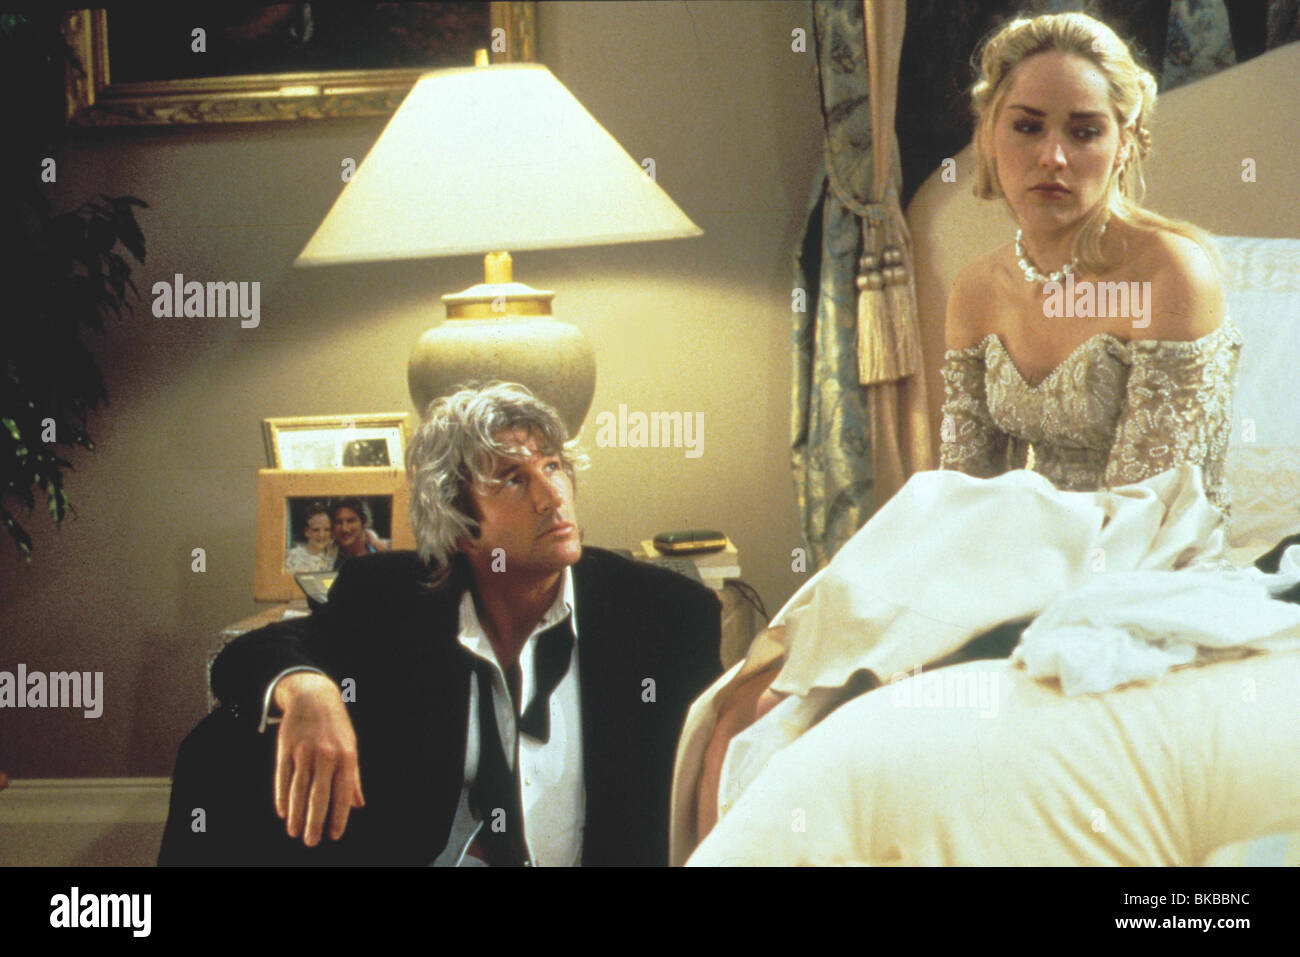 INTERSECTION (1994) RICHARD GERE, Sharon Stone 009 INTN Banque D'Images